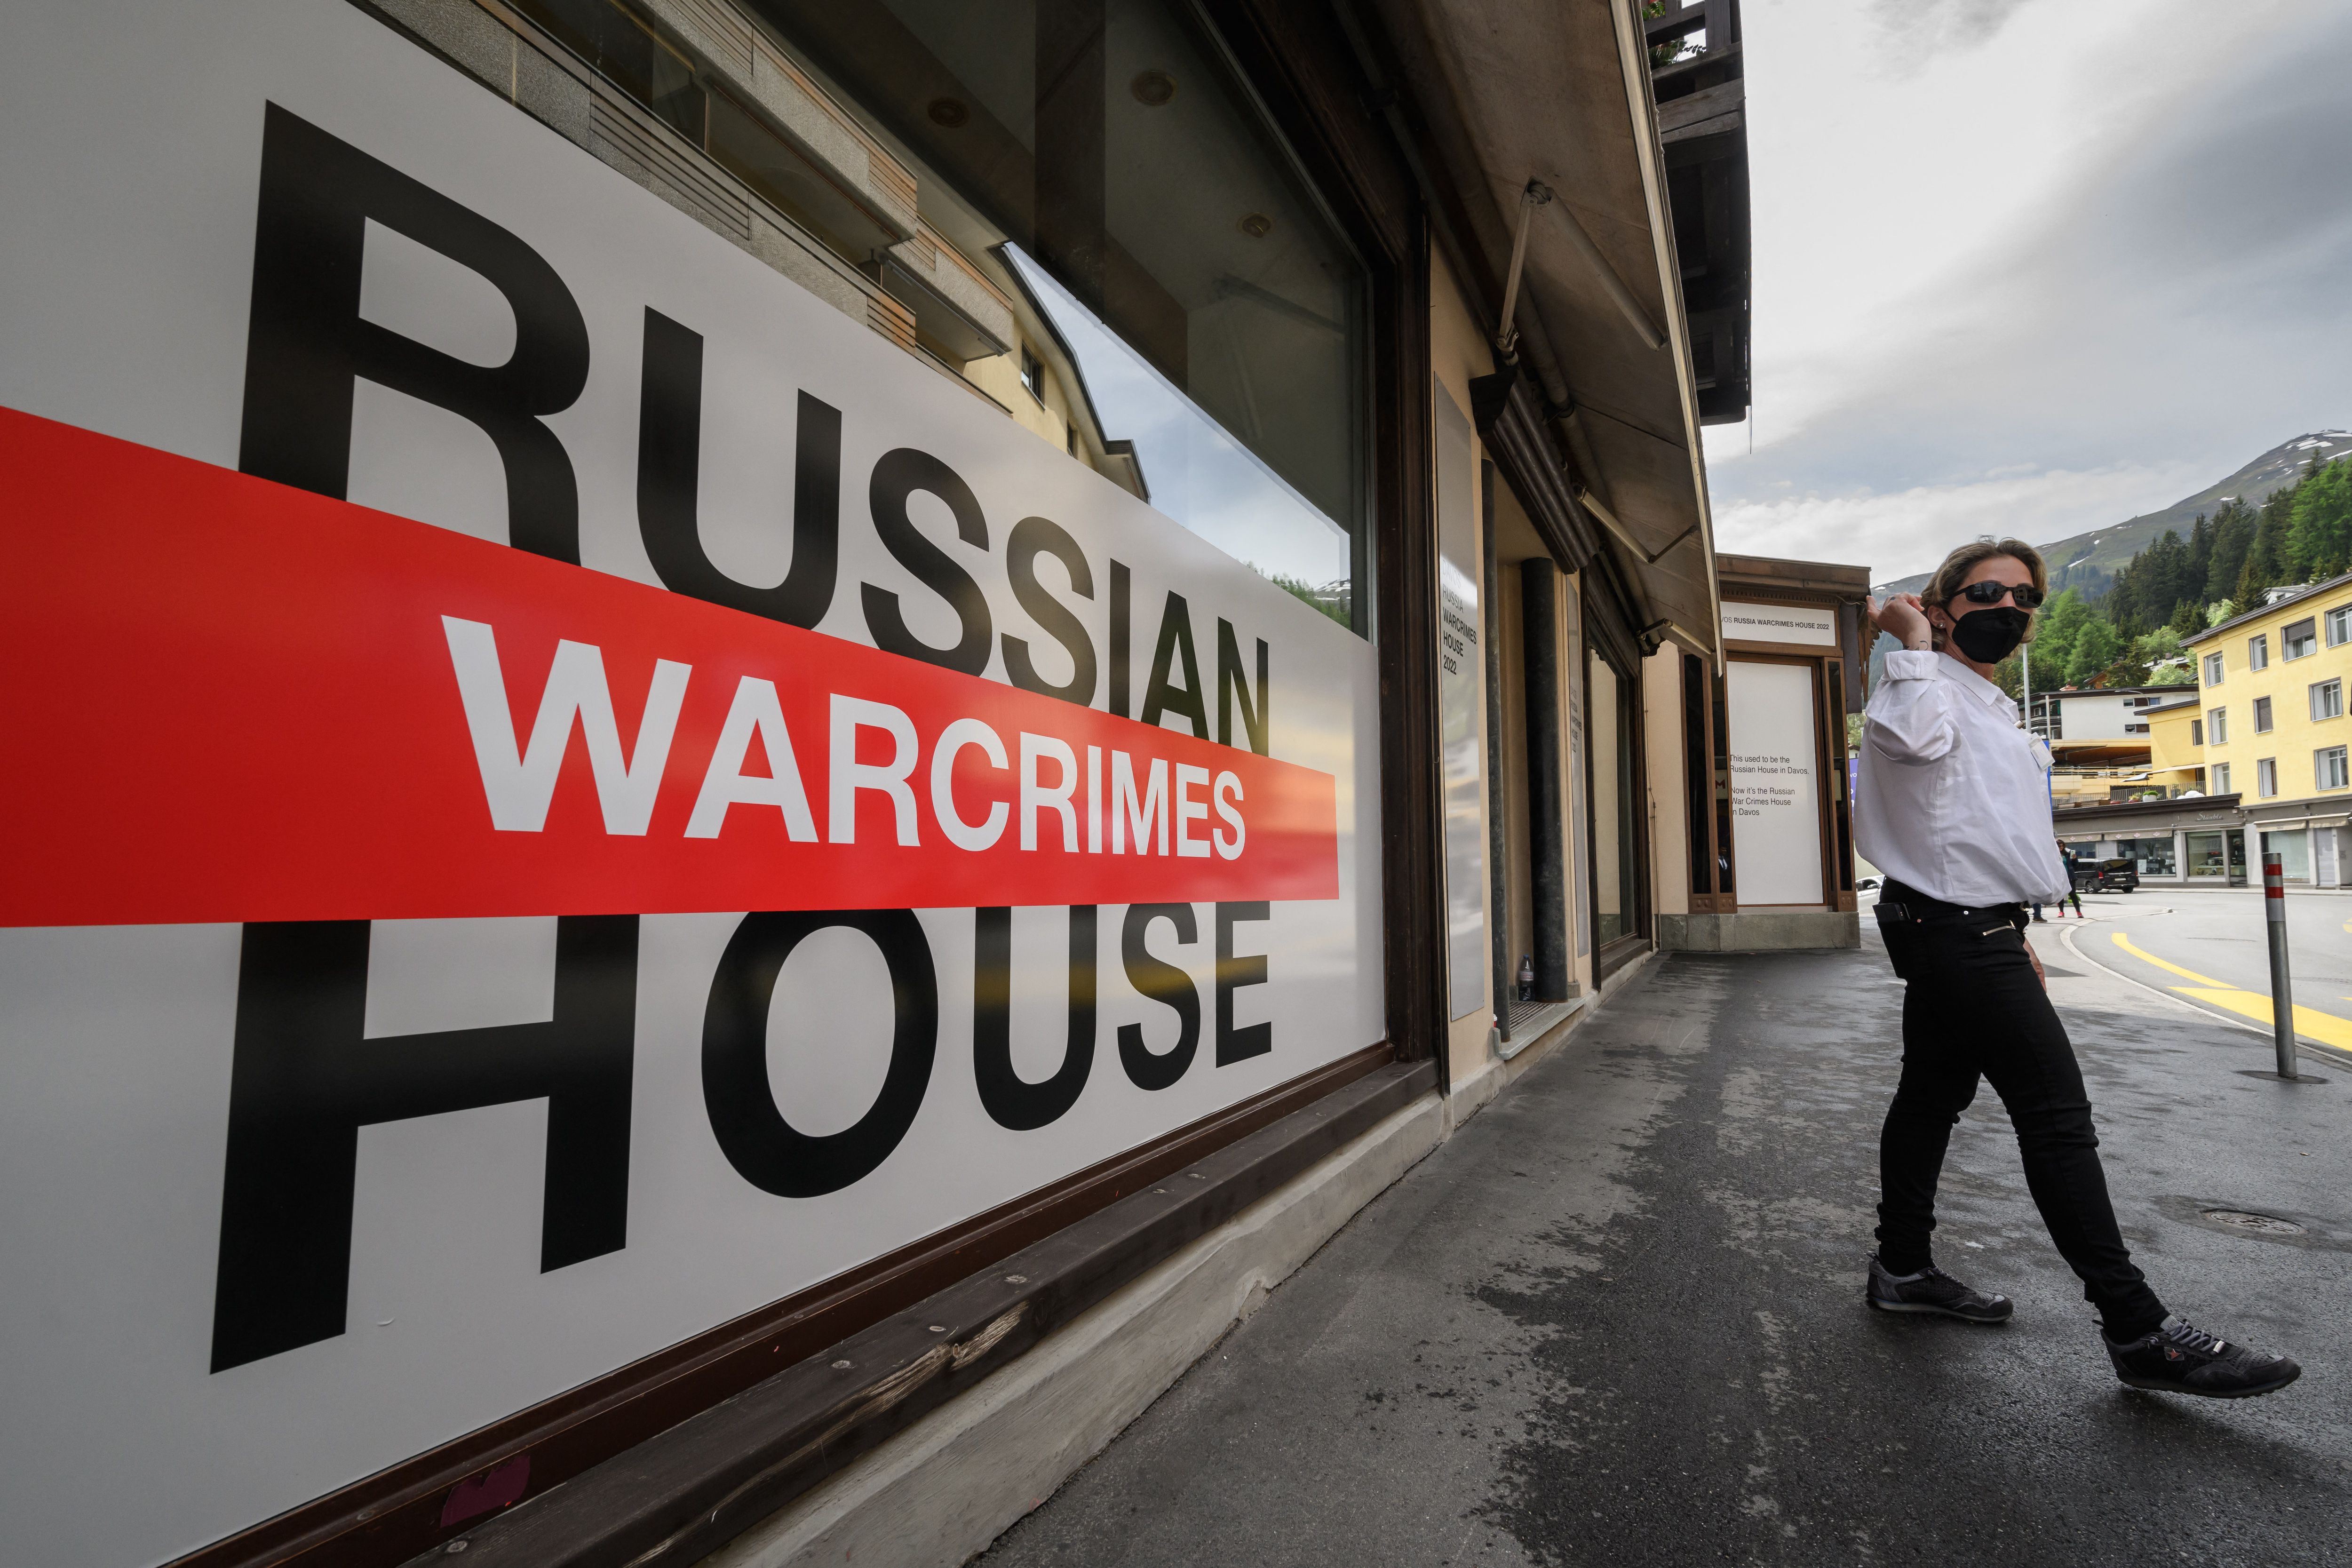 A security personnel walks next to the entrance of Russia House, now rebranded as the Russian War Crimes House, in Davos, on Sunday.